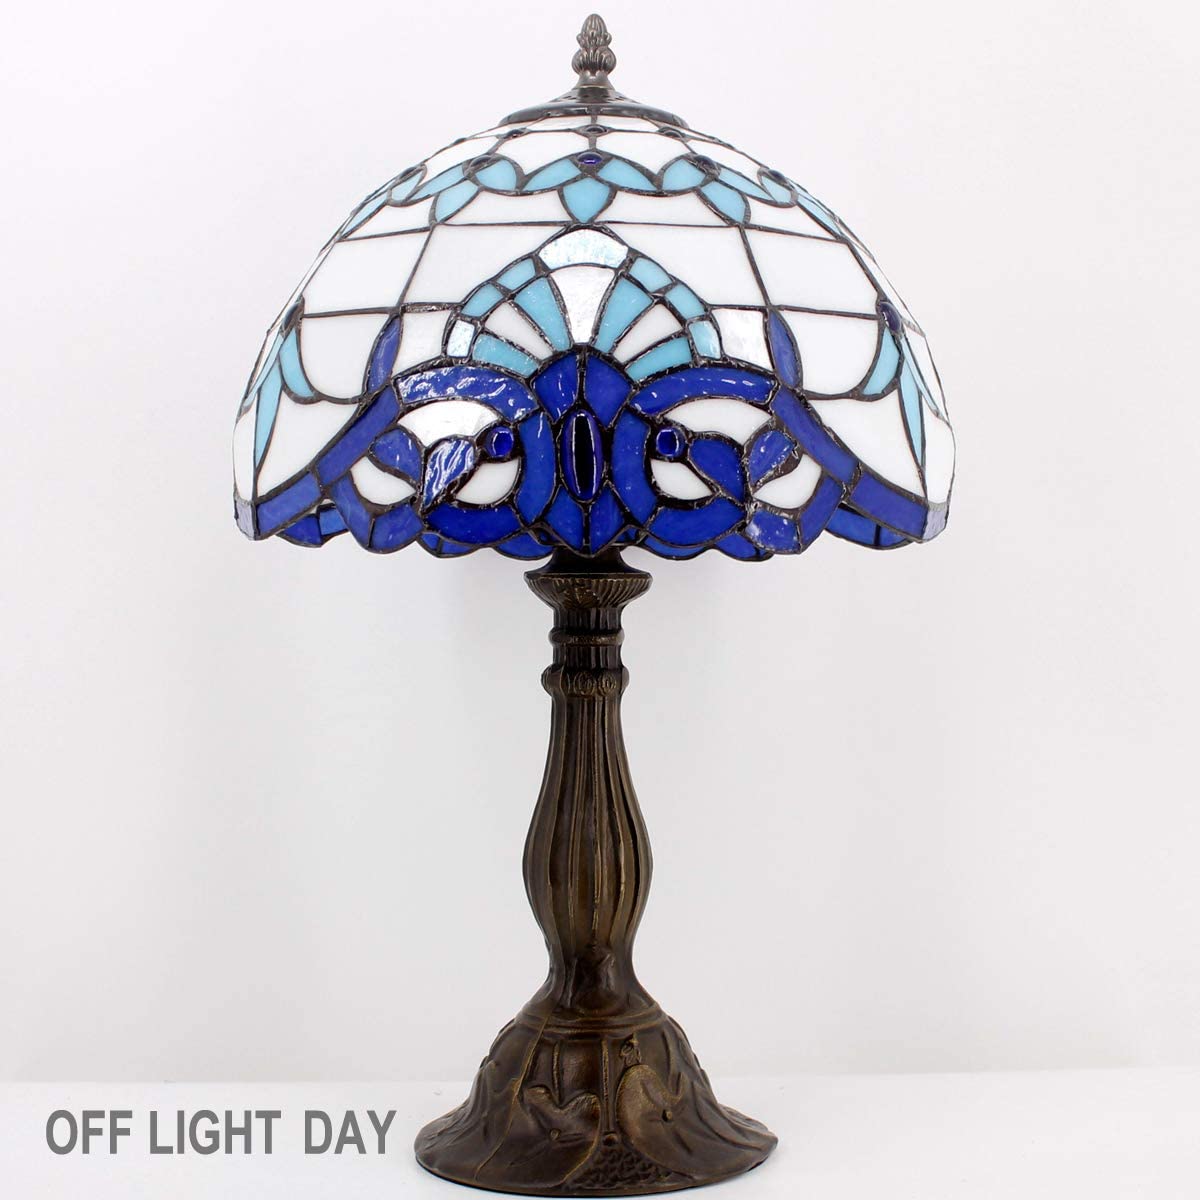 SHADY  Table Lamp Navy Blue Baroque Stained Glass Style Desk Bedside Reading Light 12X12X18 Inches Decor Bedroom Living Room Home Office S003B Series